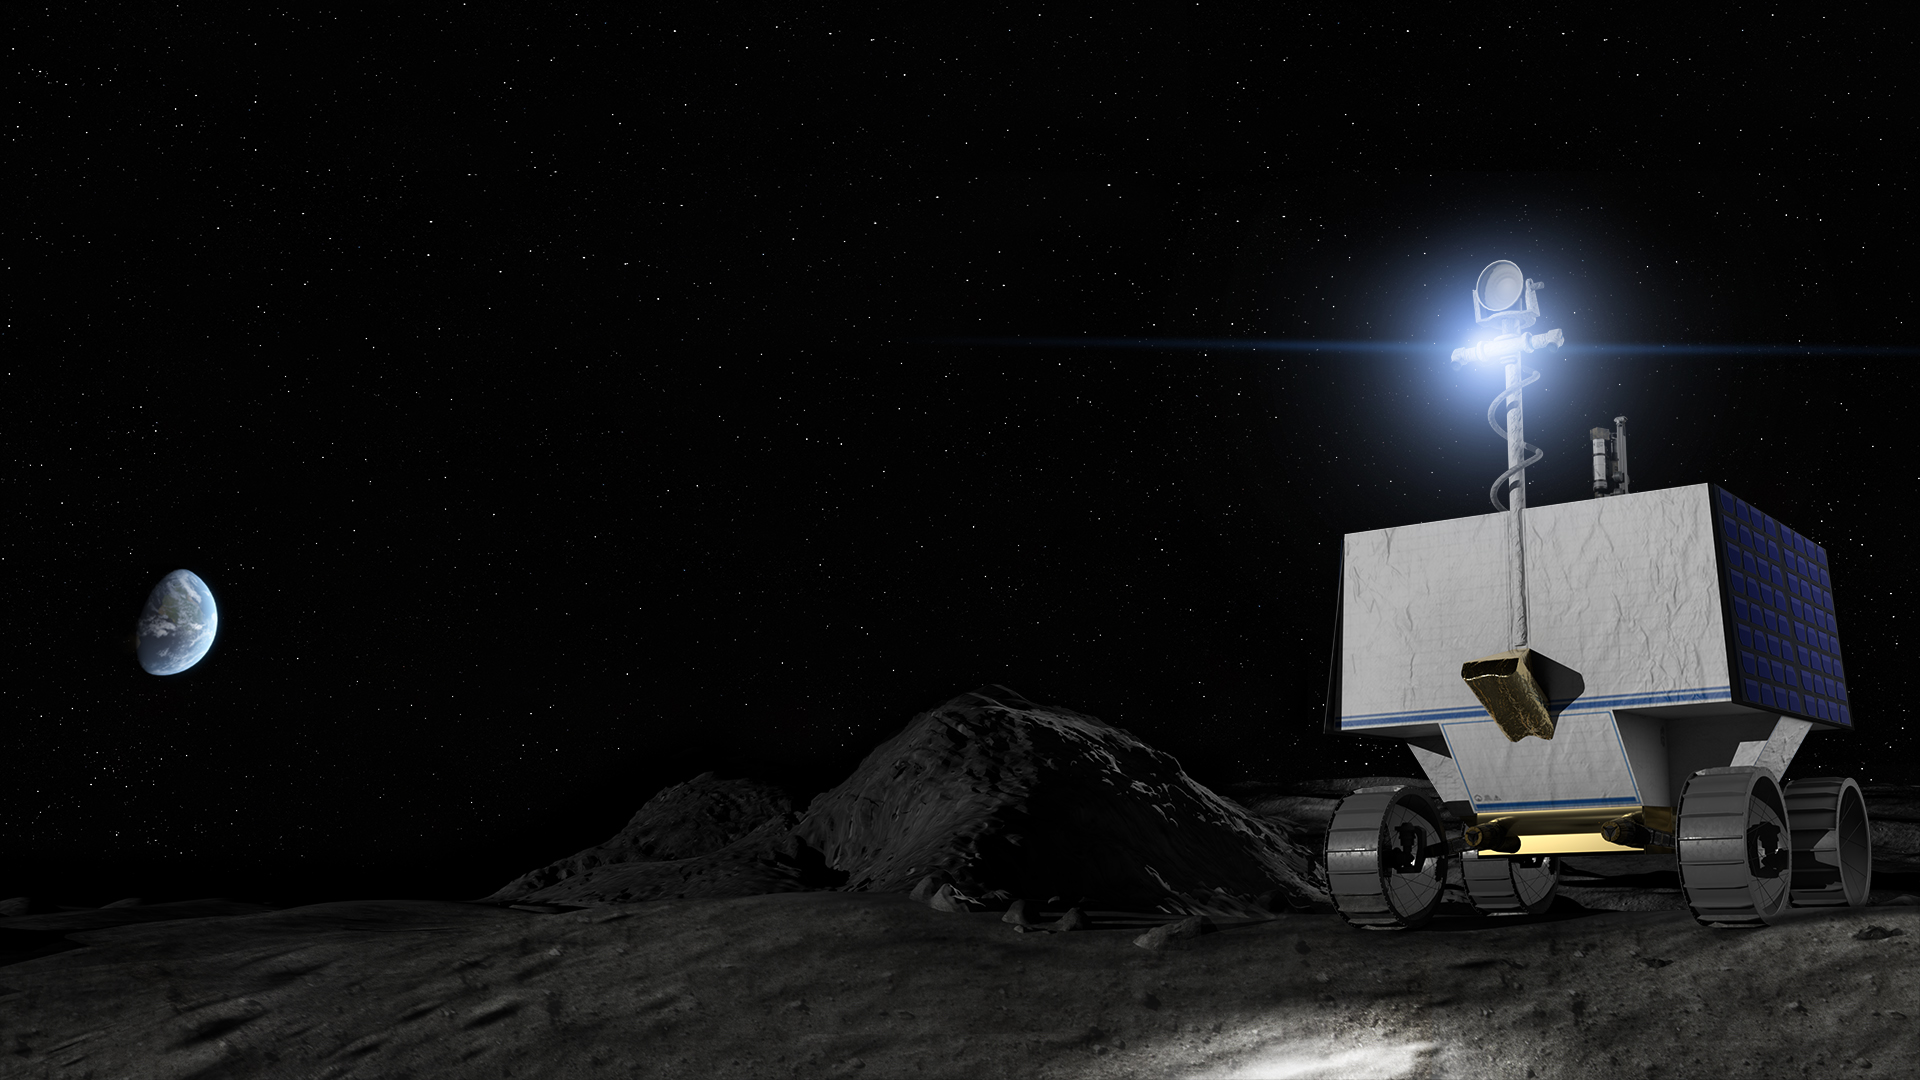 An illustration of a rover in the dark on the Moon. A light on its mast illuminates the foreground. Earth is visible in the background sky.